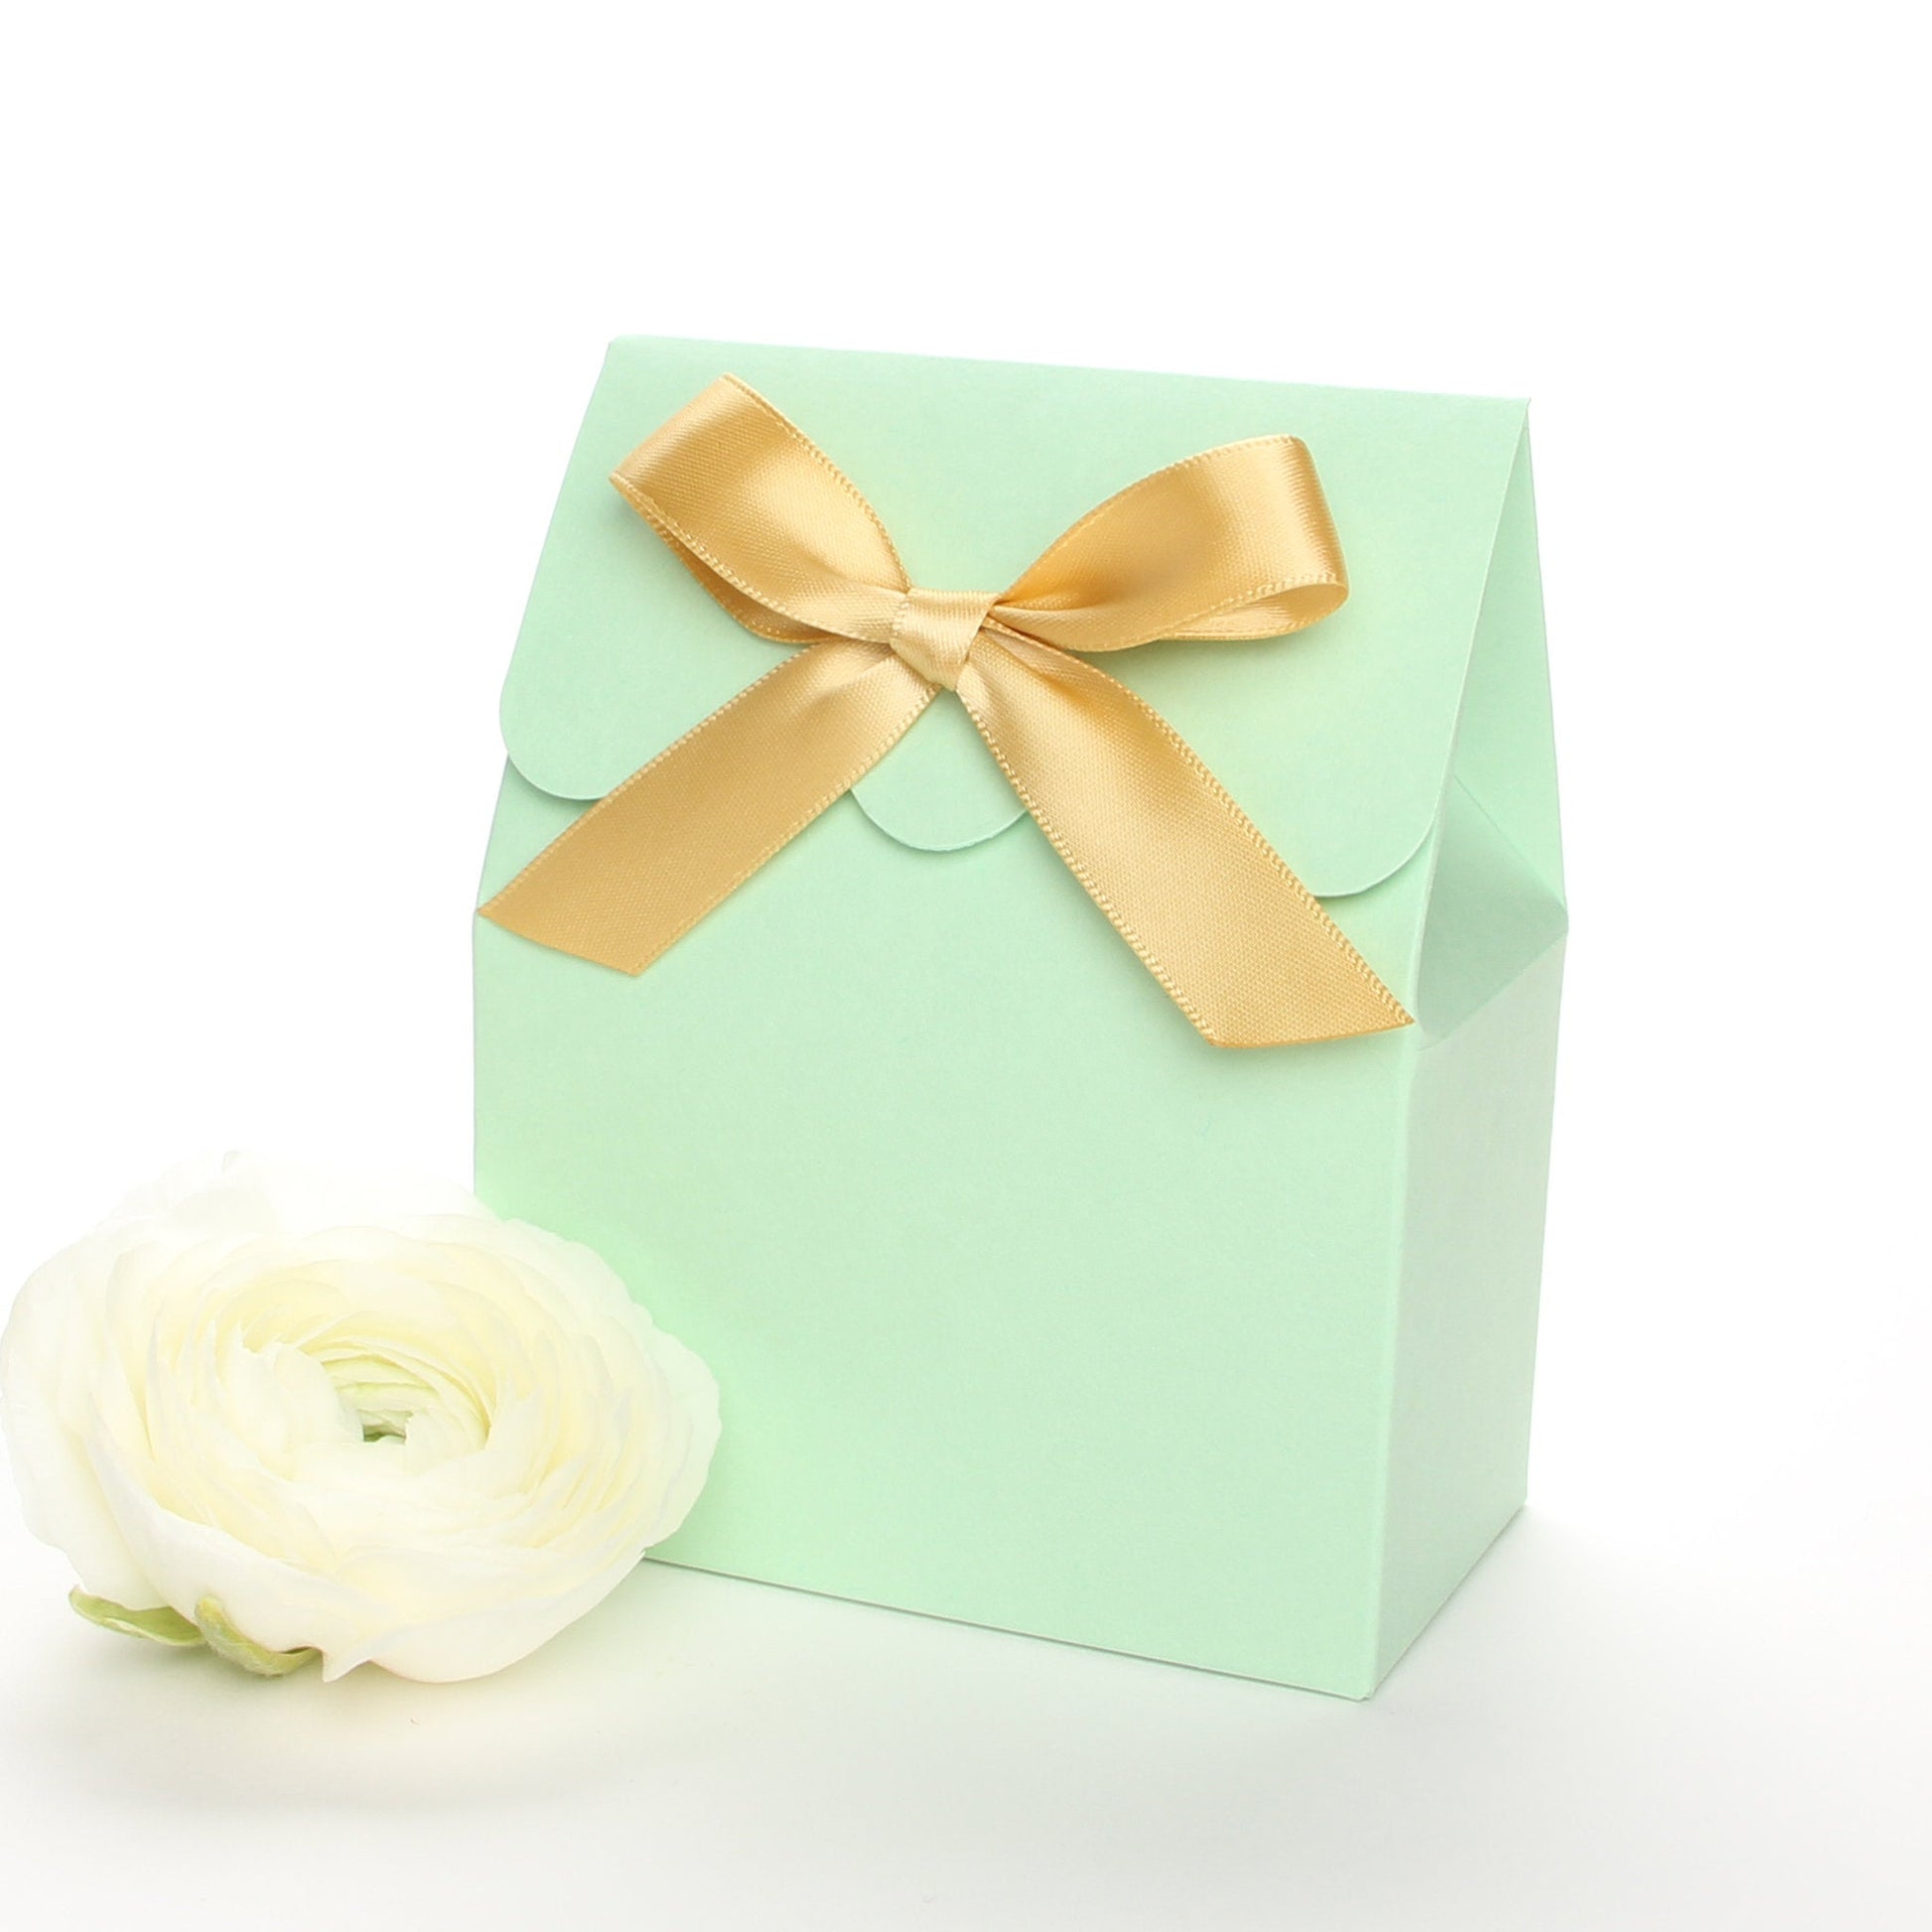 Lux Party’s mint green favor box with a scalloped edge and a gold satin bow next to white ranunculus flowers.